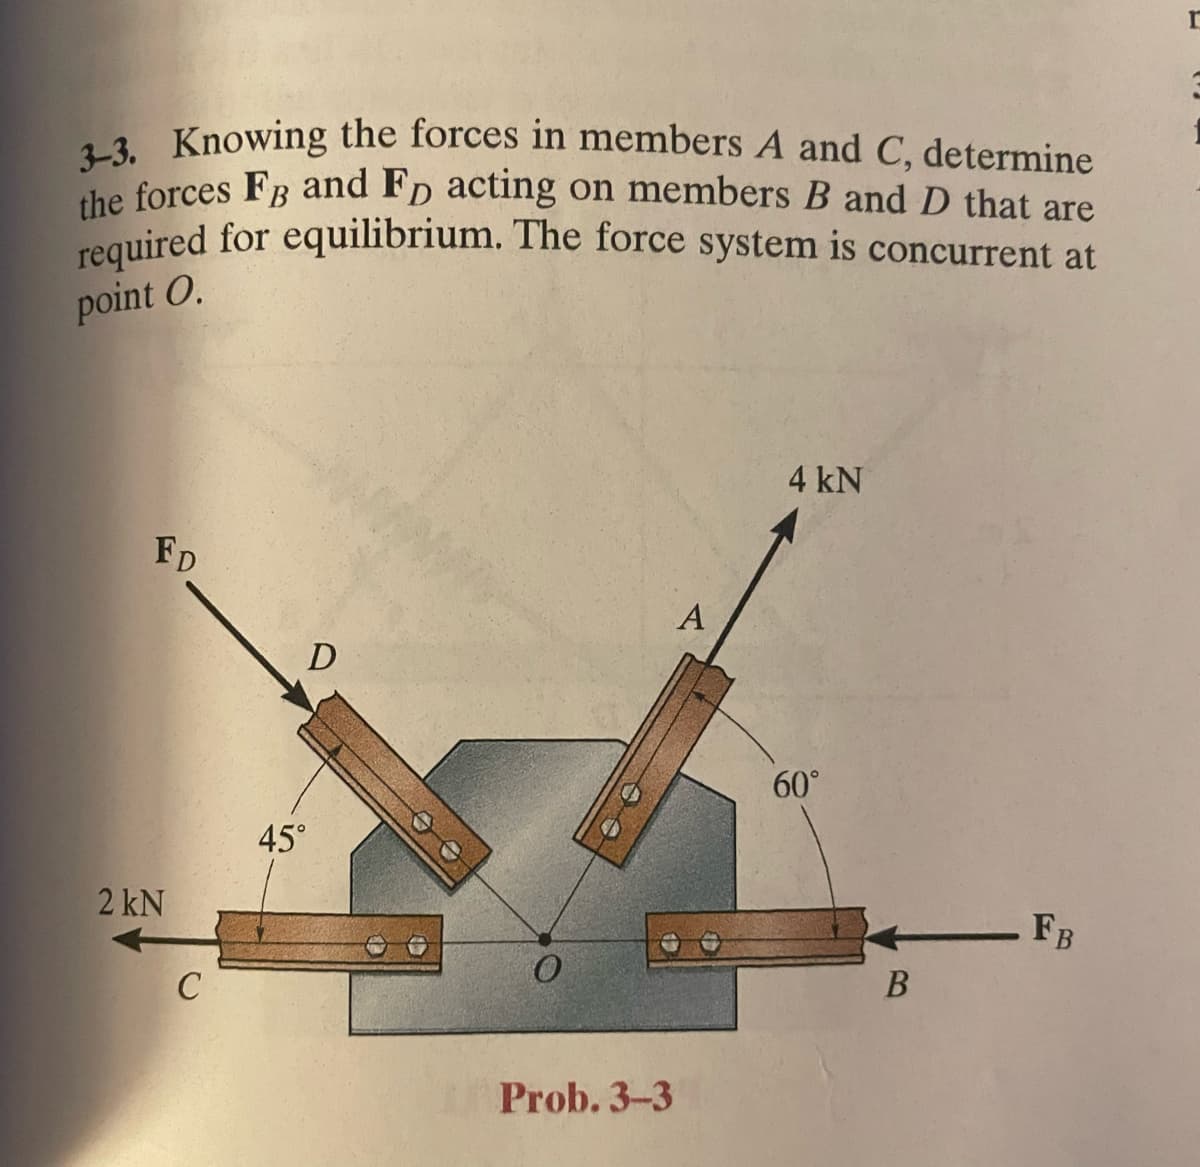 3-3. Knowing the forces in members A and C, determine
the forces FB and FD acting on members B and D that are
required for equilibrium. The force system is concurrent at
point O.
FD
2 kN
C
D
45°
Prob. 3-3
A
4 kN
60°
B
FB
L